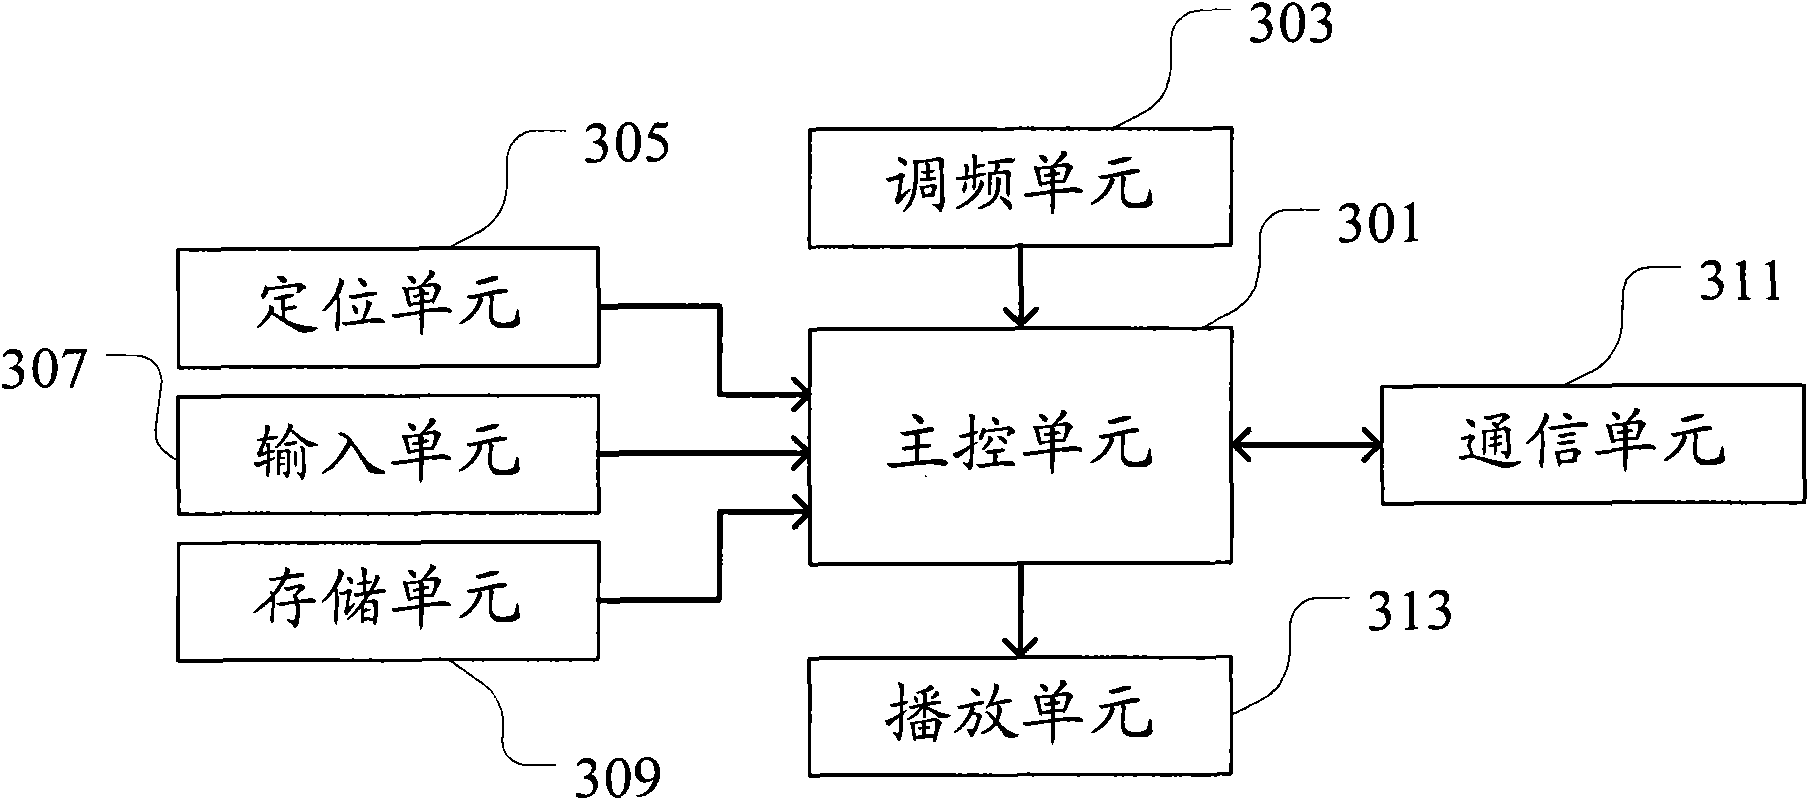 Frequency modulation broadcast receiving system, frequency modulation receiving terminal and processing method